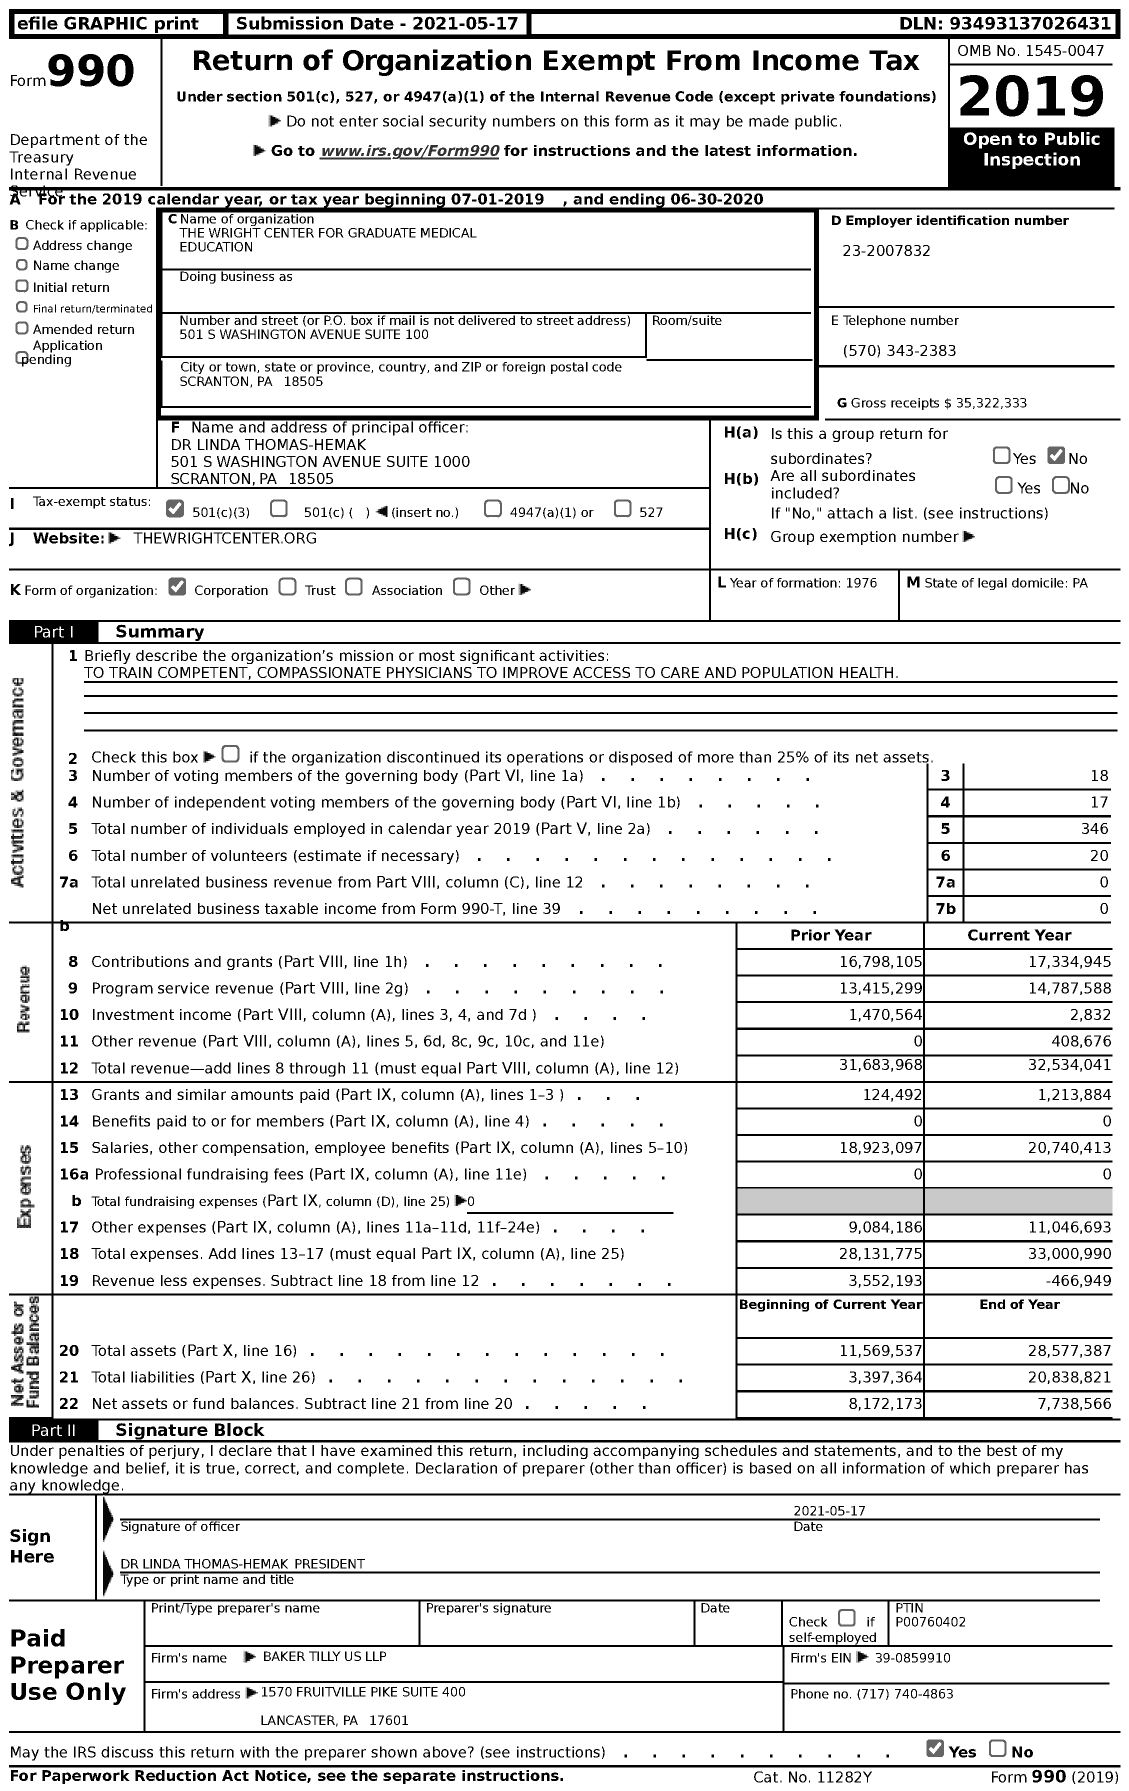 Image of first page of 2019 Form 990 for The Wright Center for Graduate Medical Education